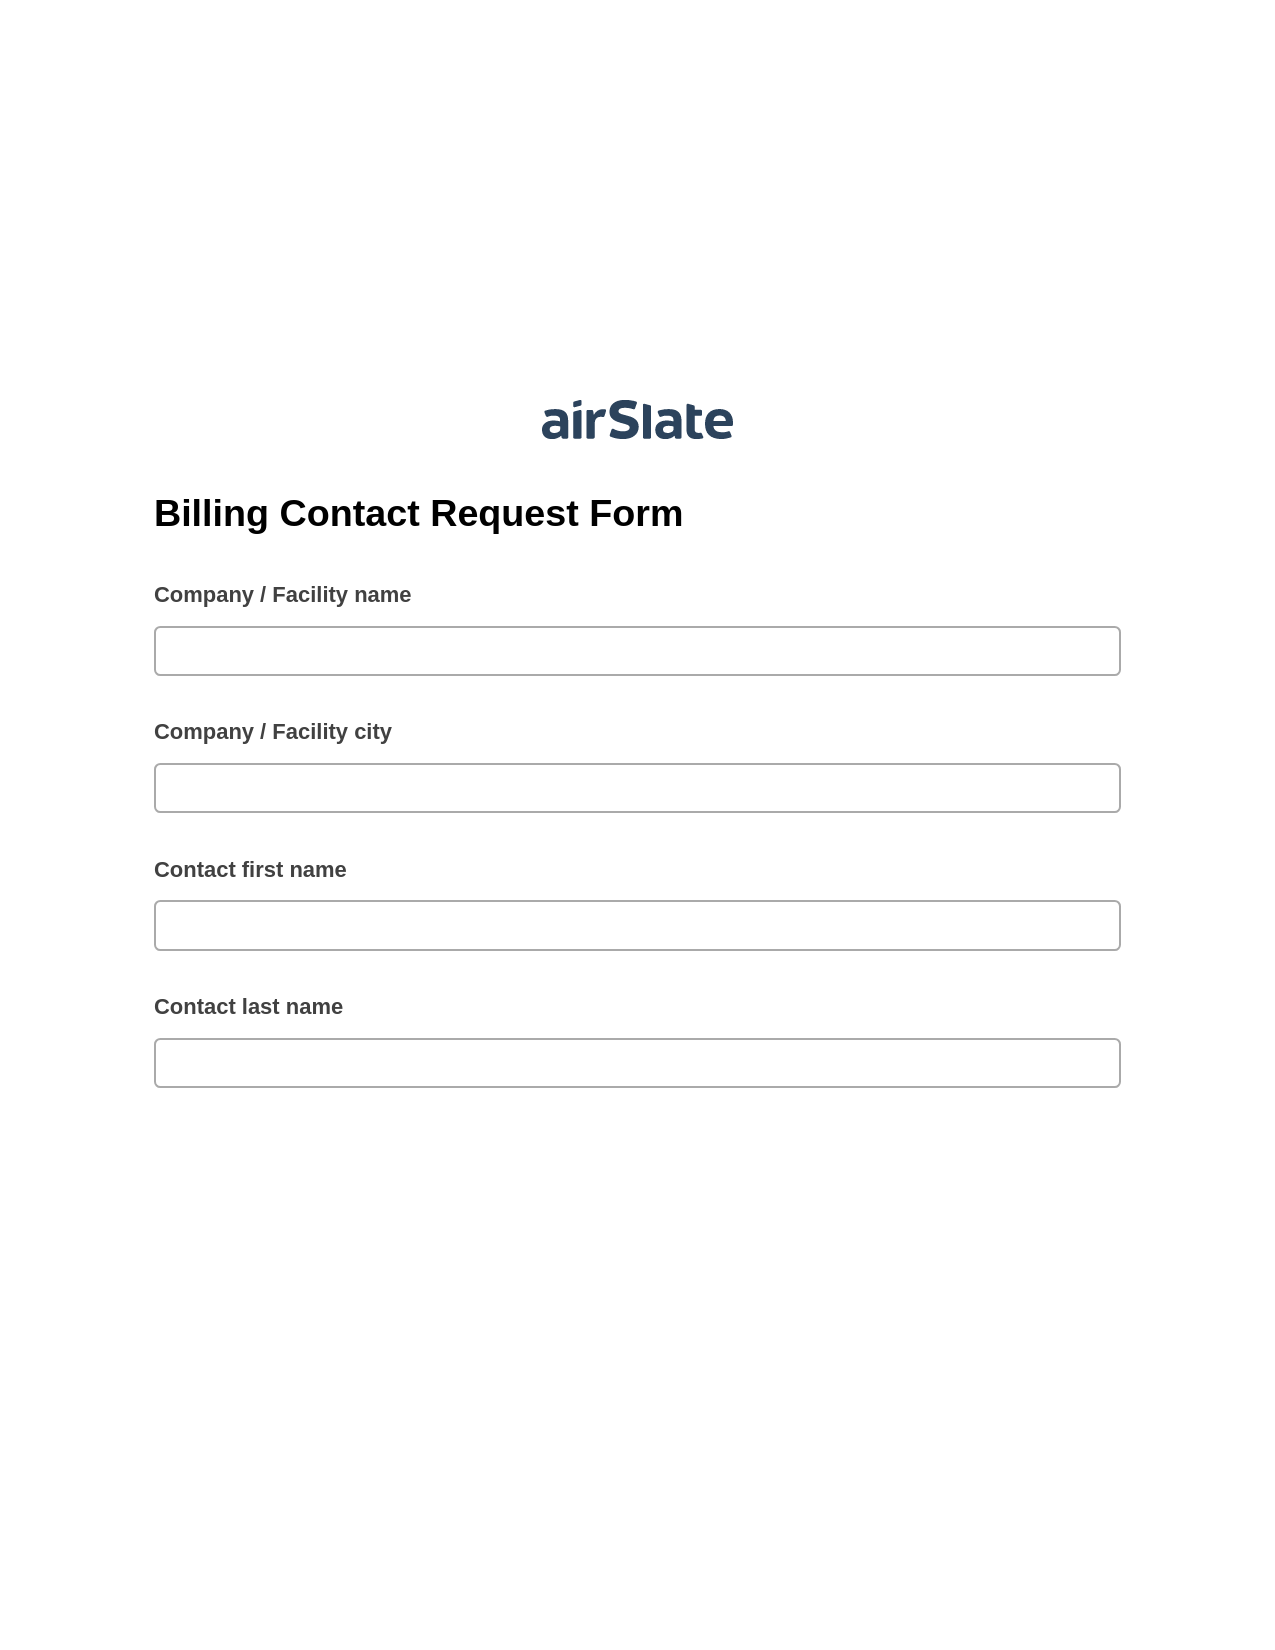 Billing Contact Request Form Pre-fill Dropdowns from Google Sheet Bot, Export to MS Dynamics 365 Bot, Archive to SharePoint Folder Bot